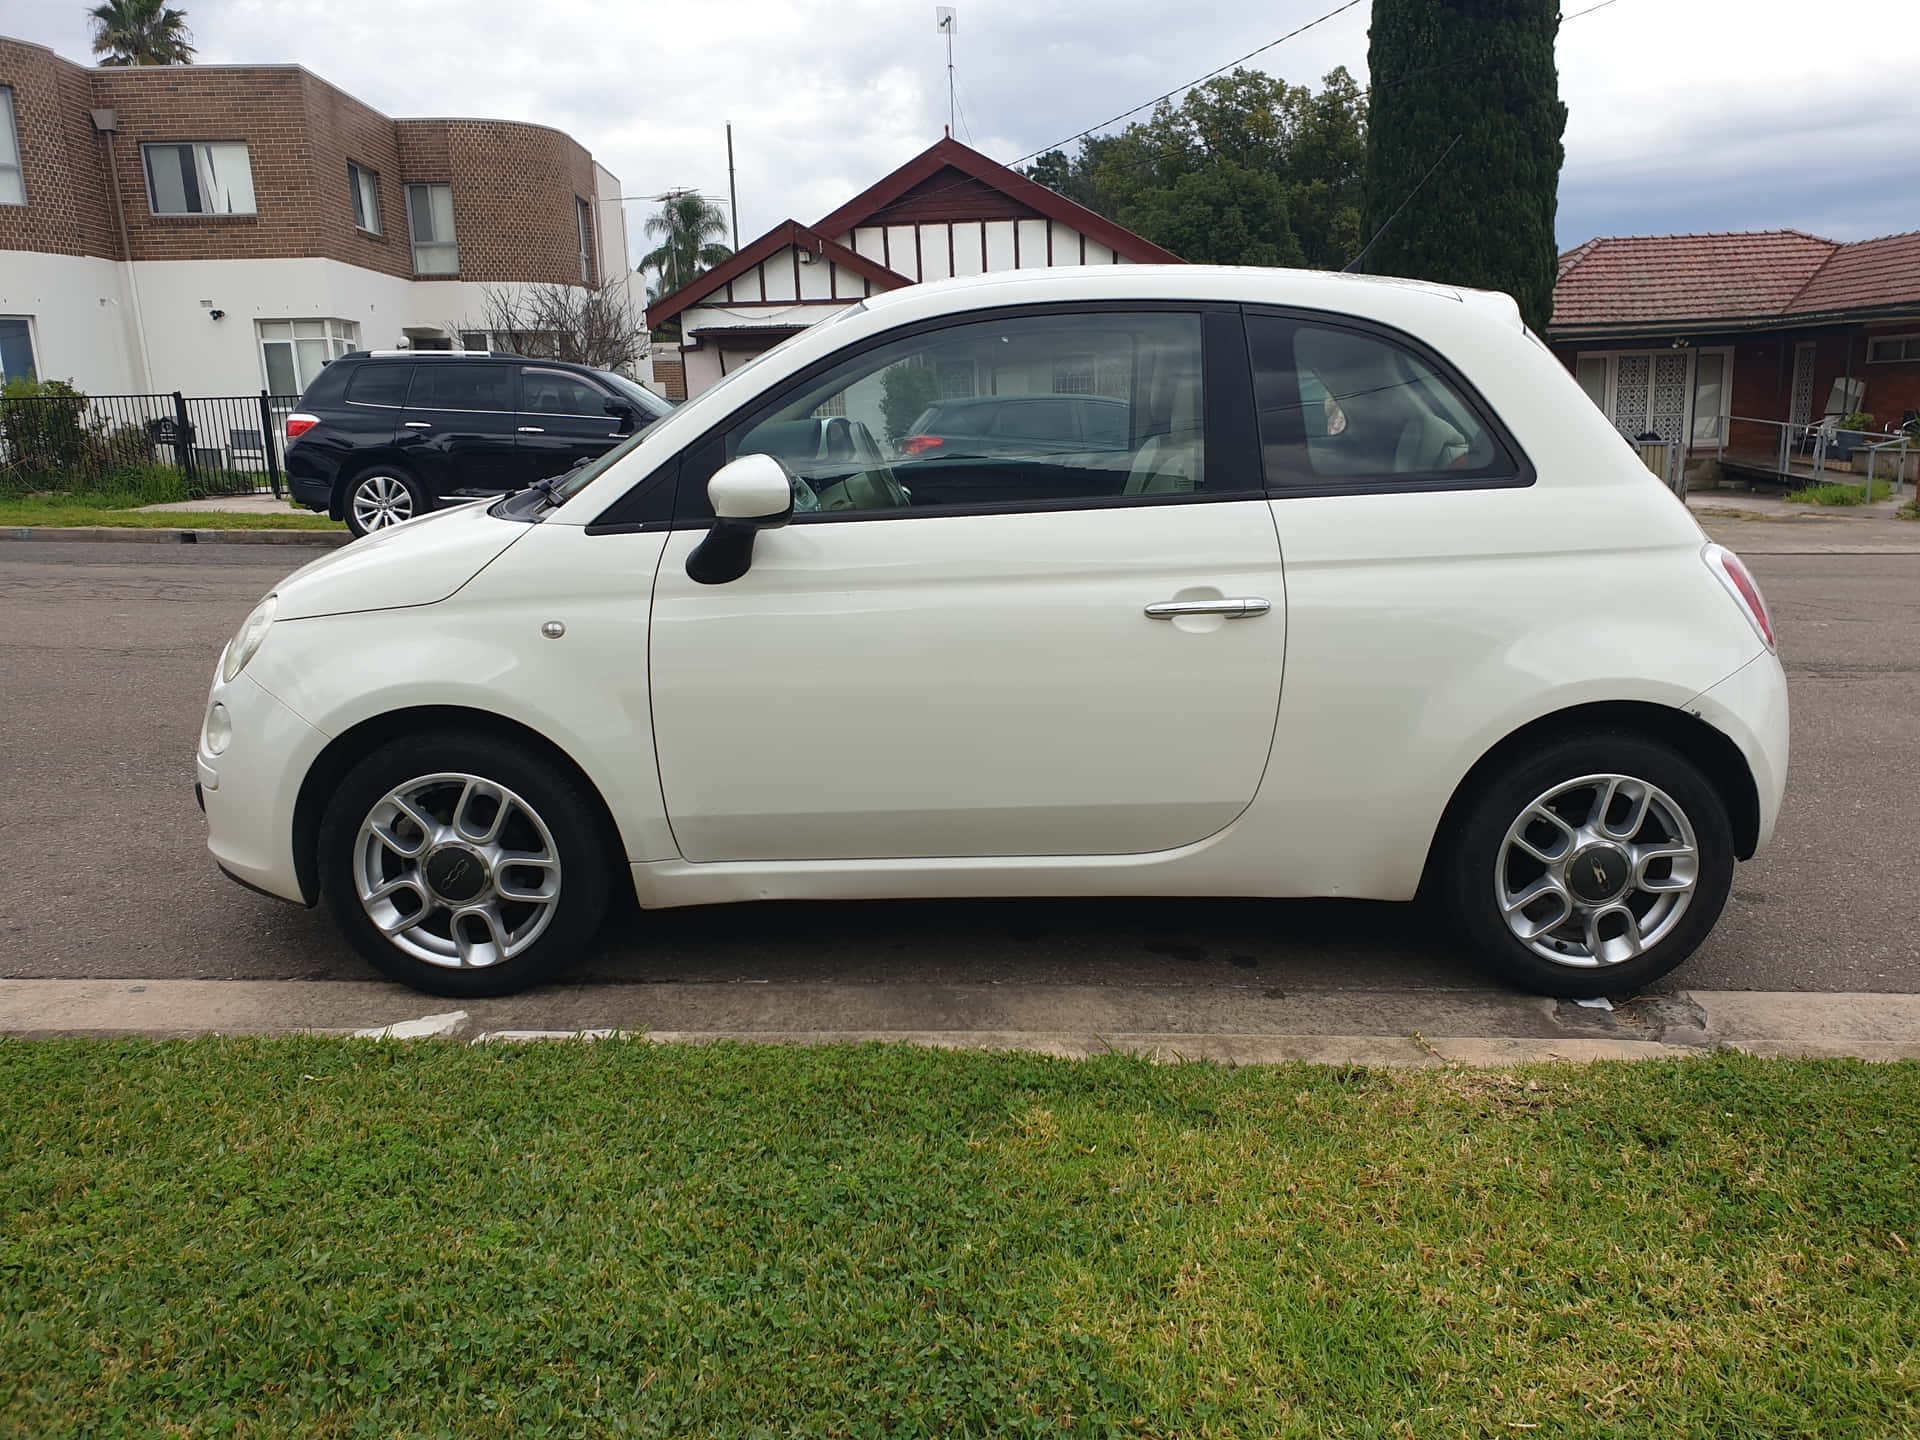 Take a Ride in the Style of Fiat